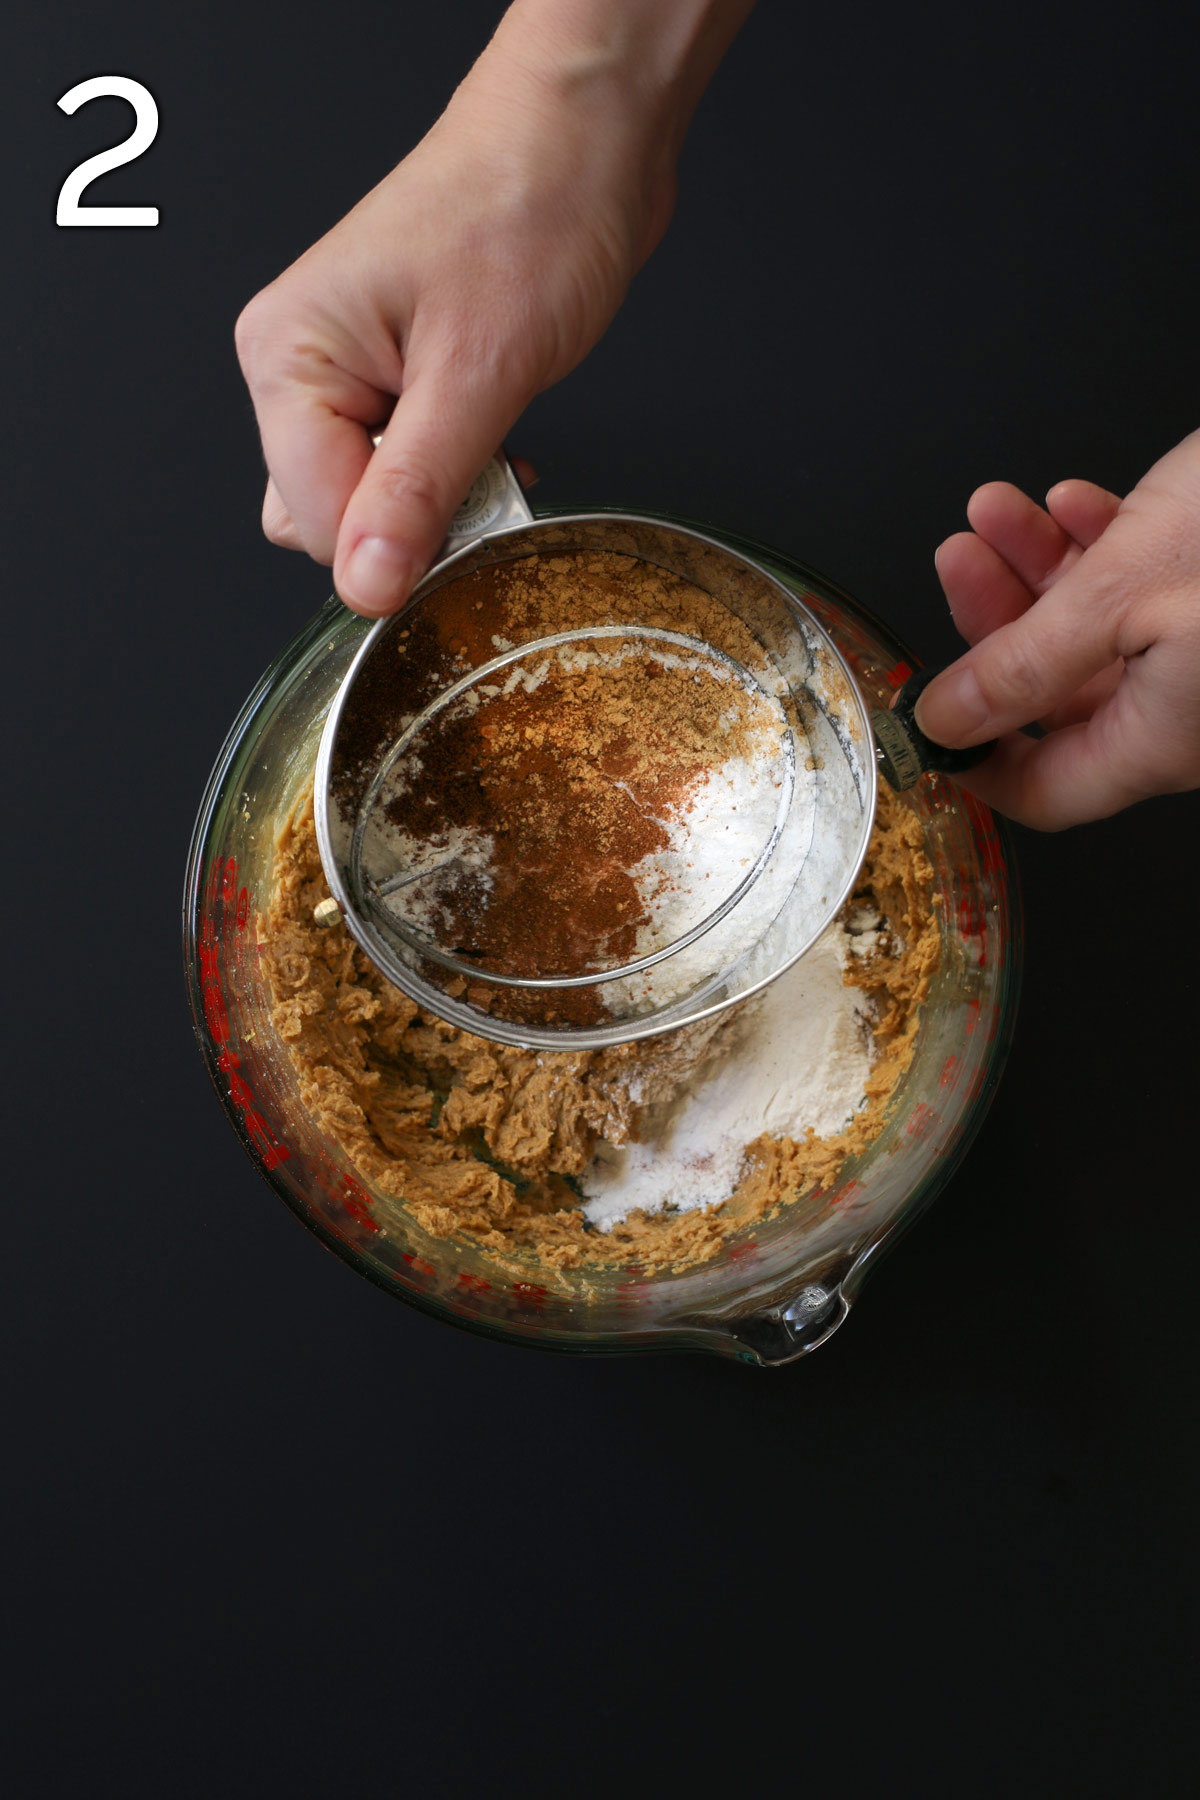 holding the sifter of dry ingredients over the pyrex bowl.